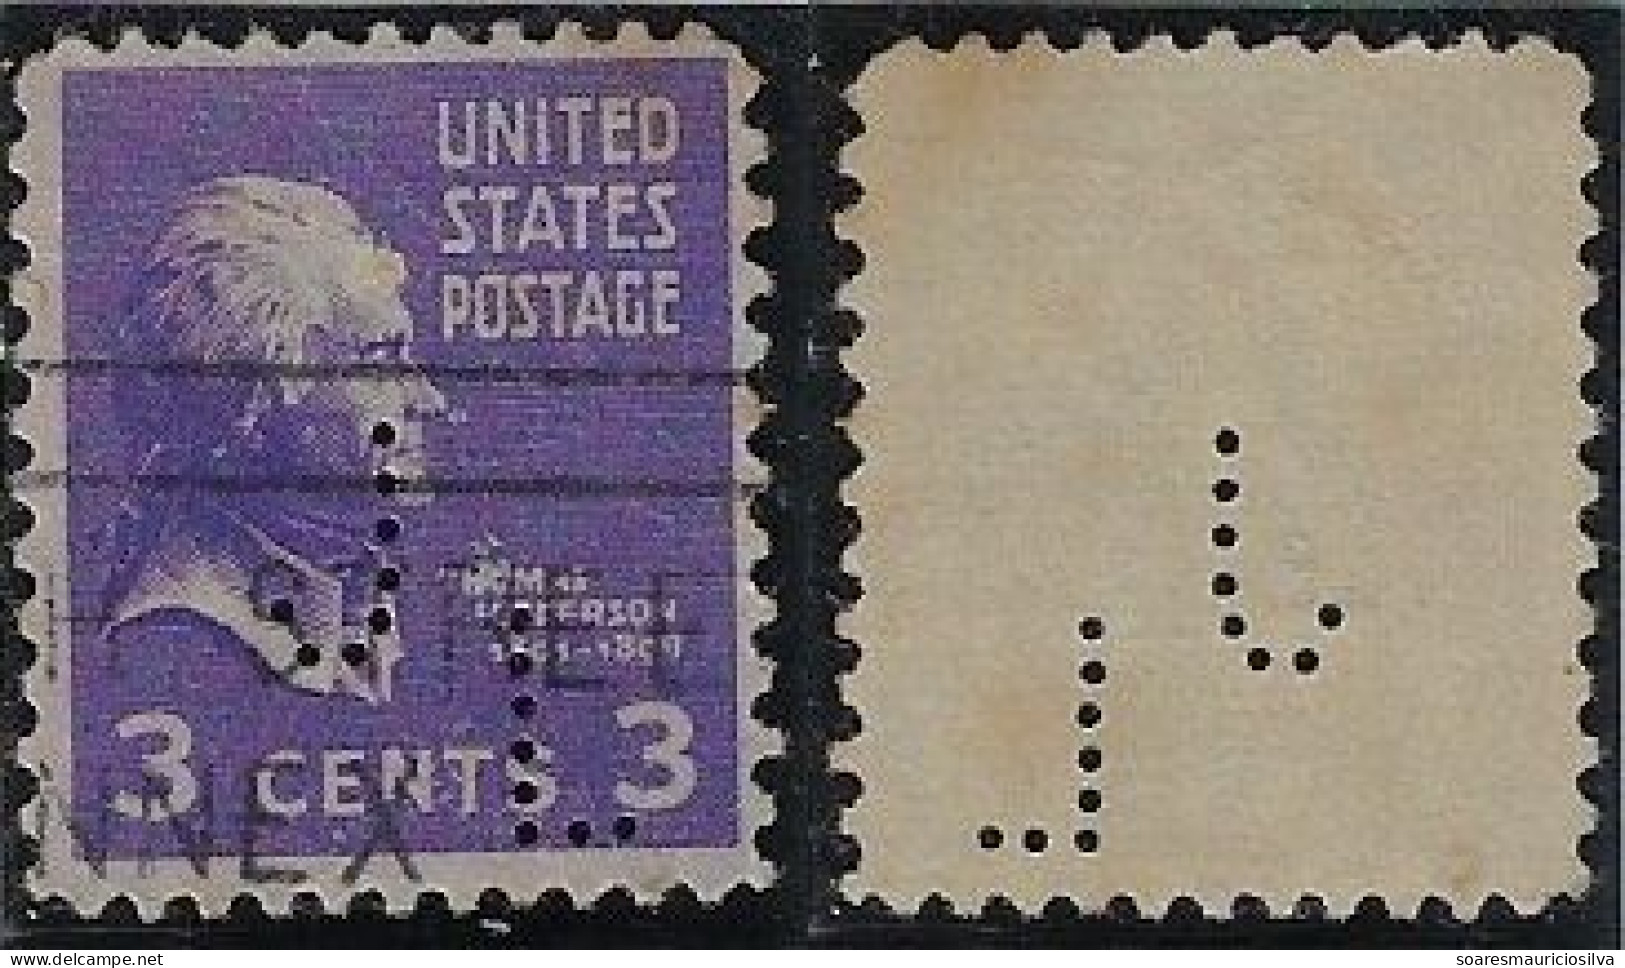 USA United States 1923/1938 Stamp With Perfin JL By John Lucas & Company Incorported From New York Lochung Perfore - Perforés